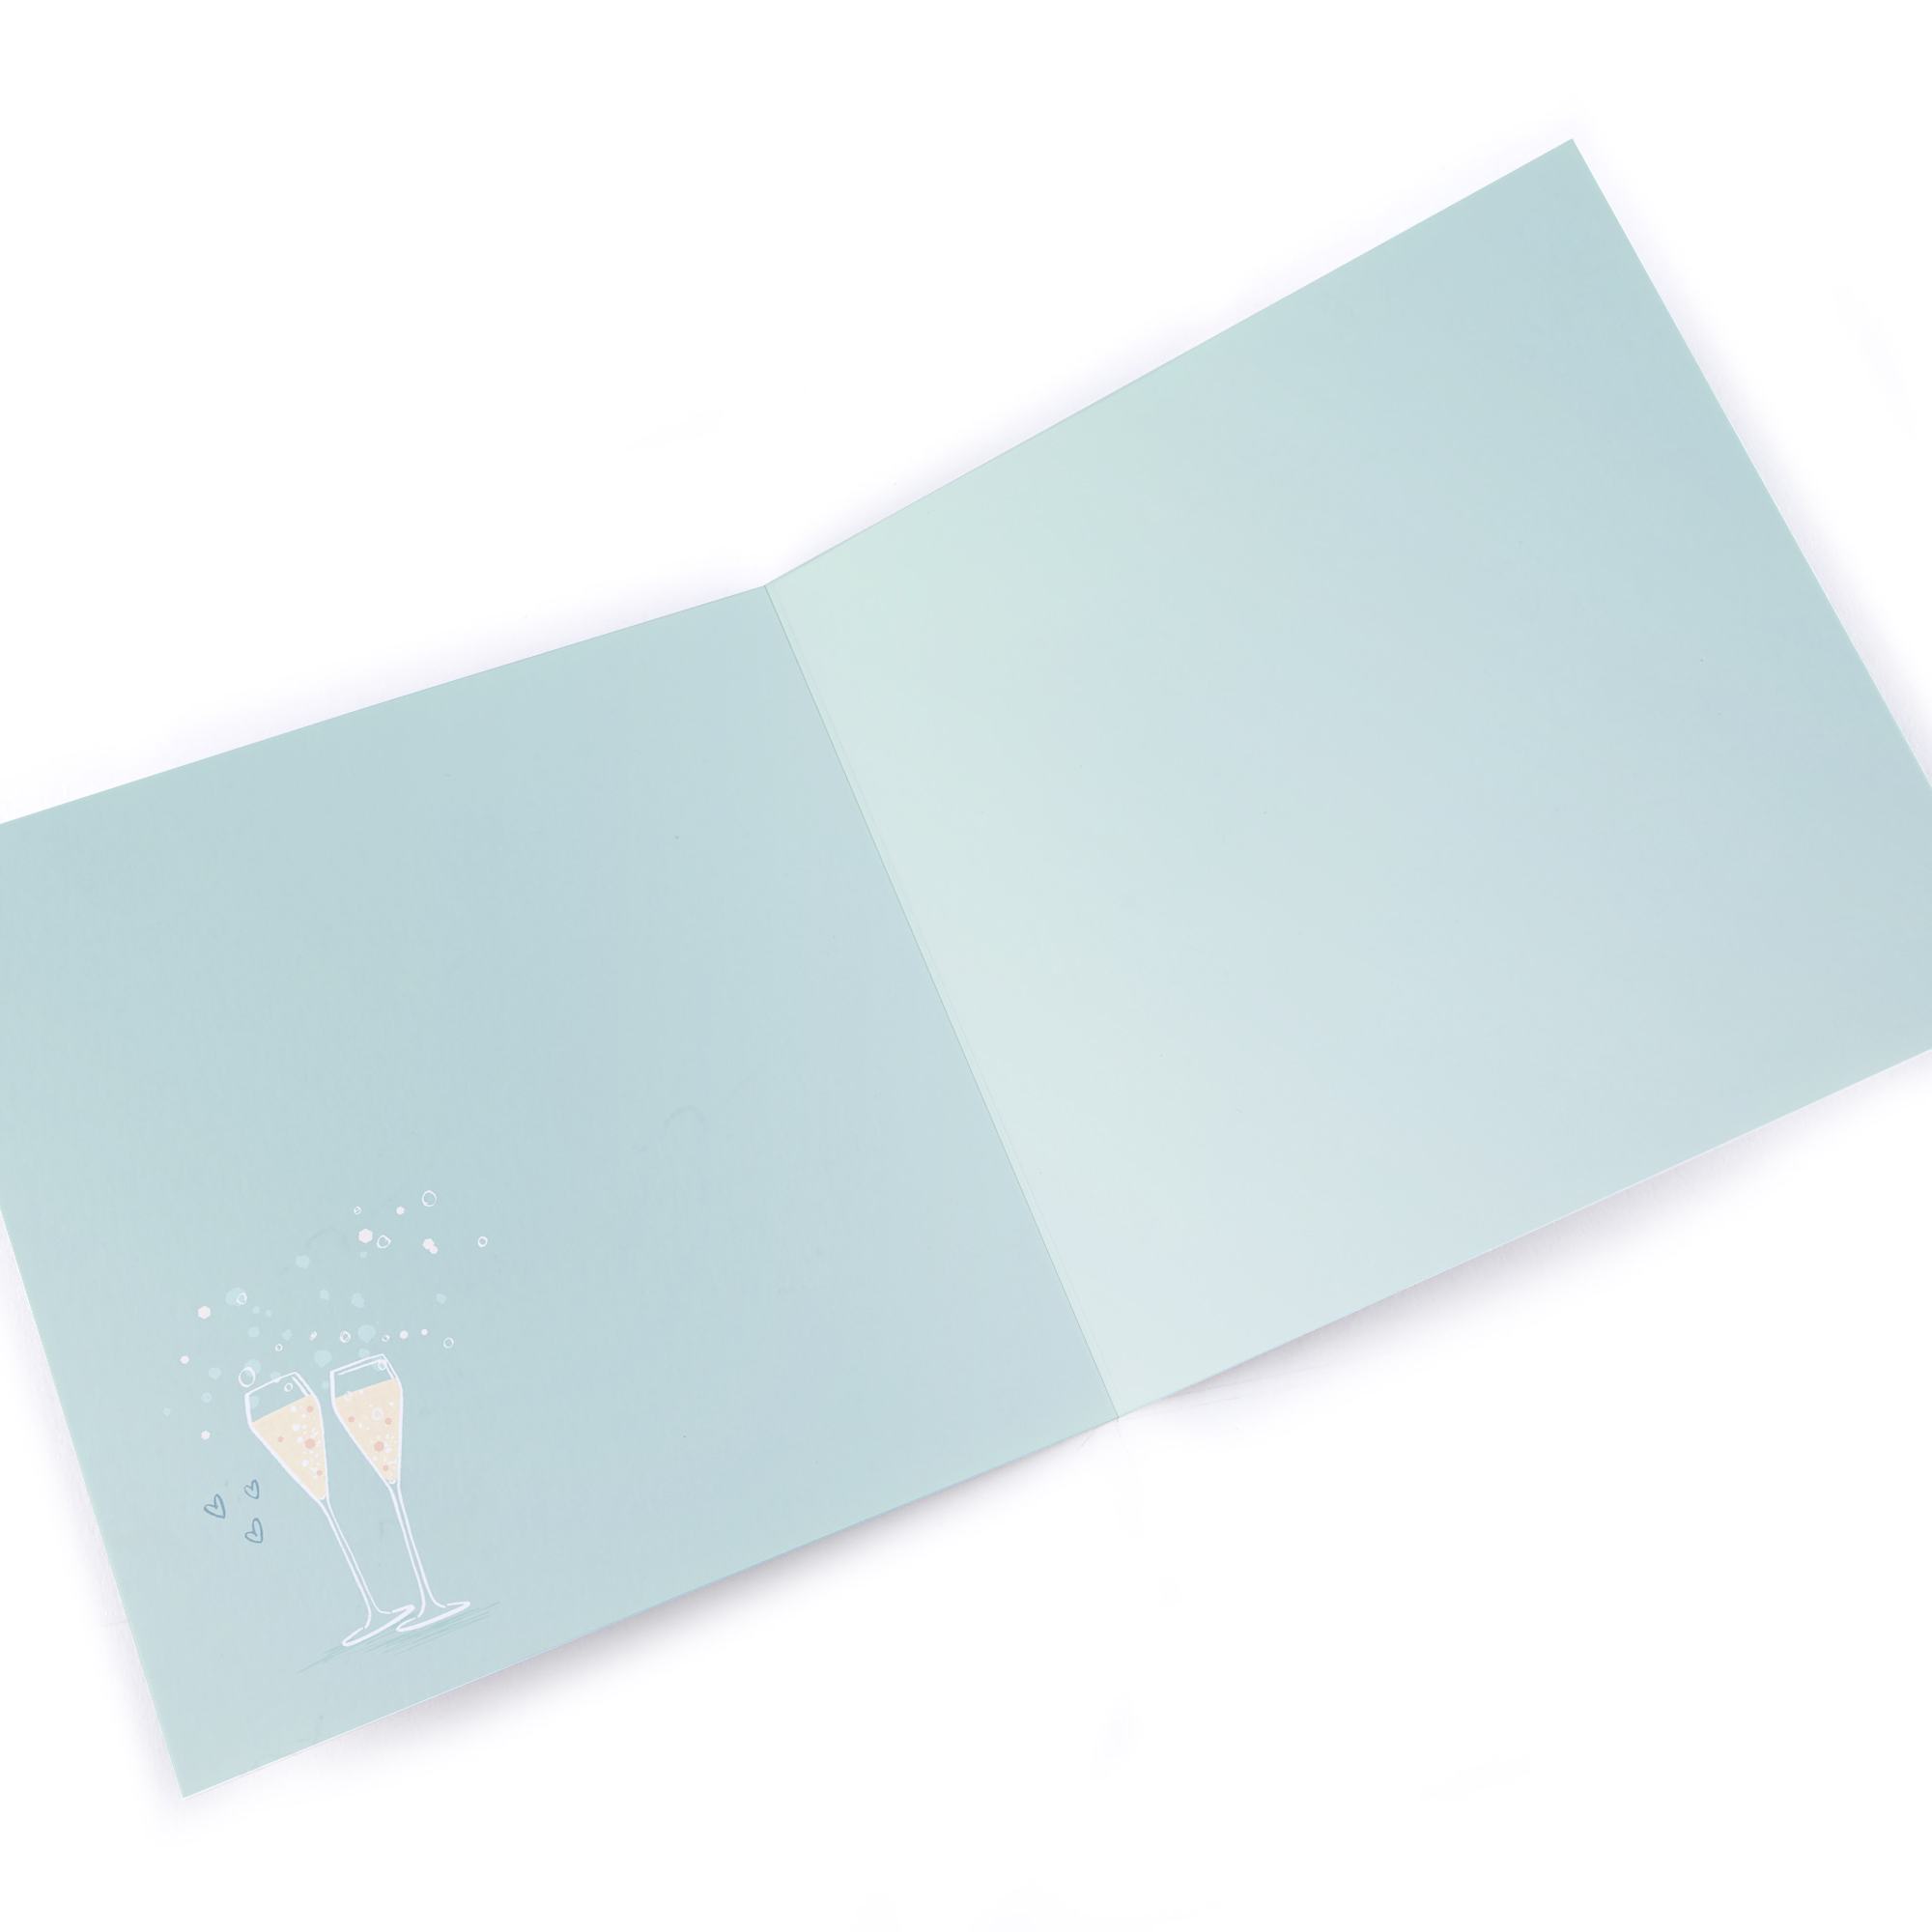 Personalised New Year Card - Champagne Flutes